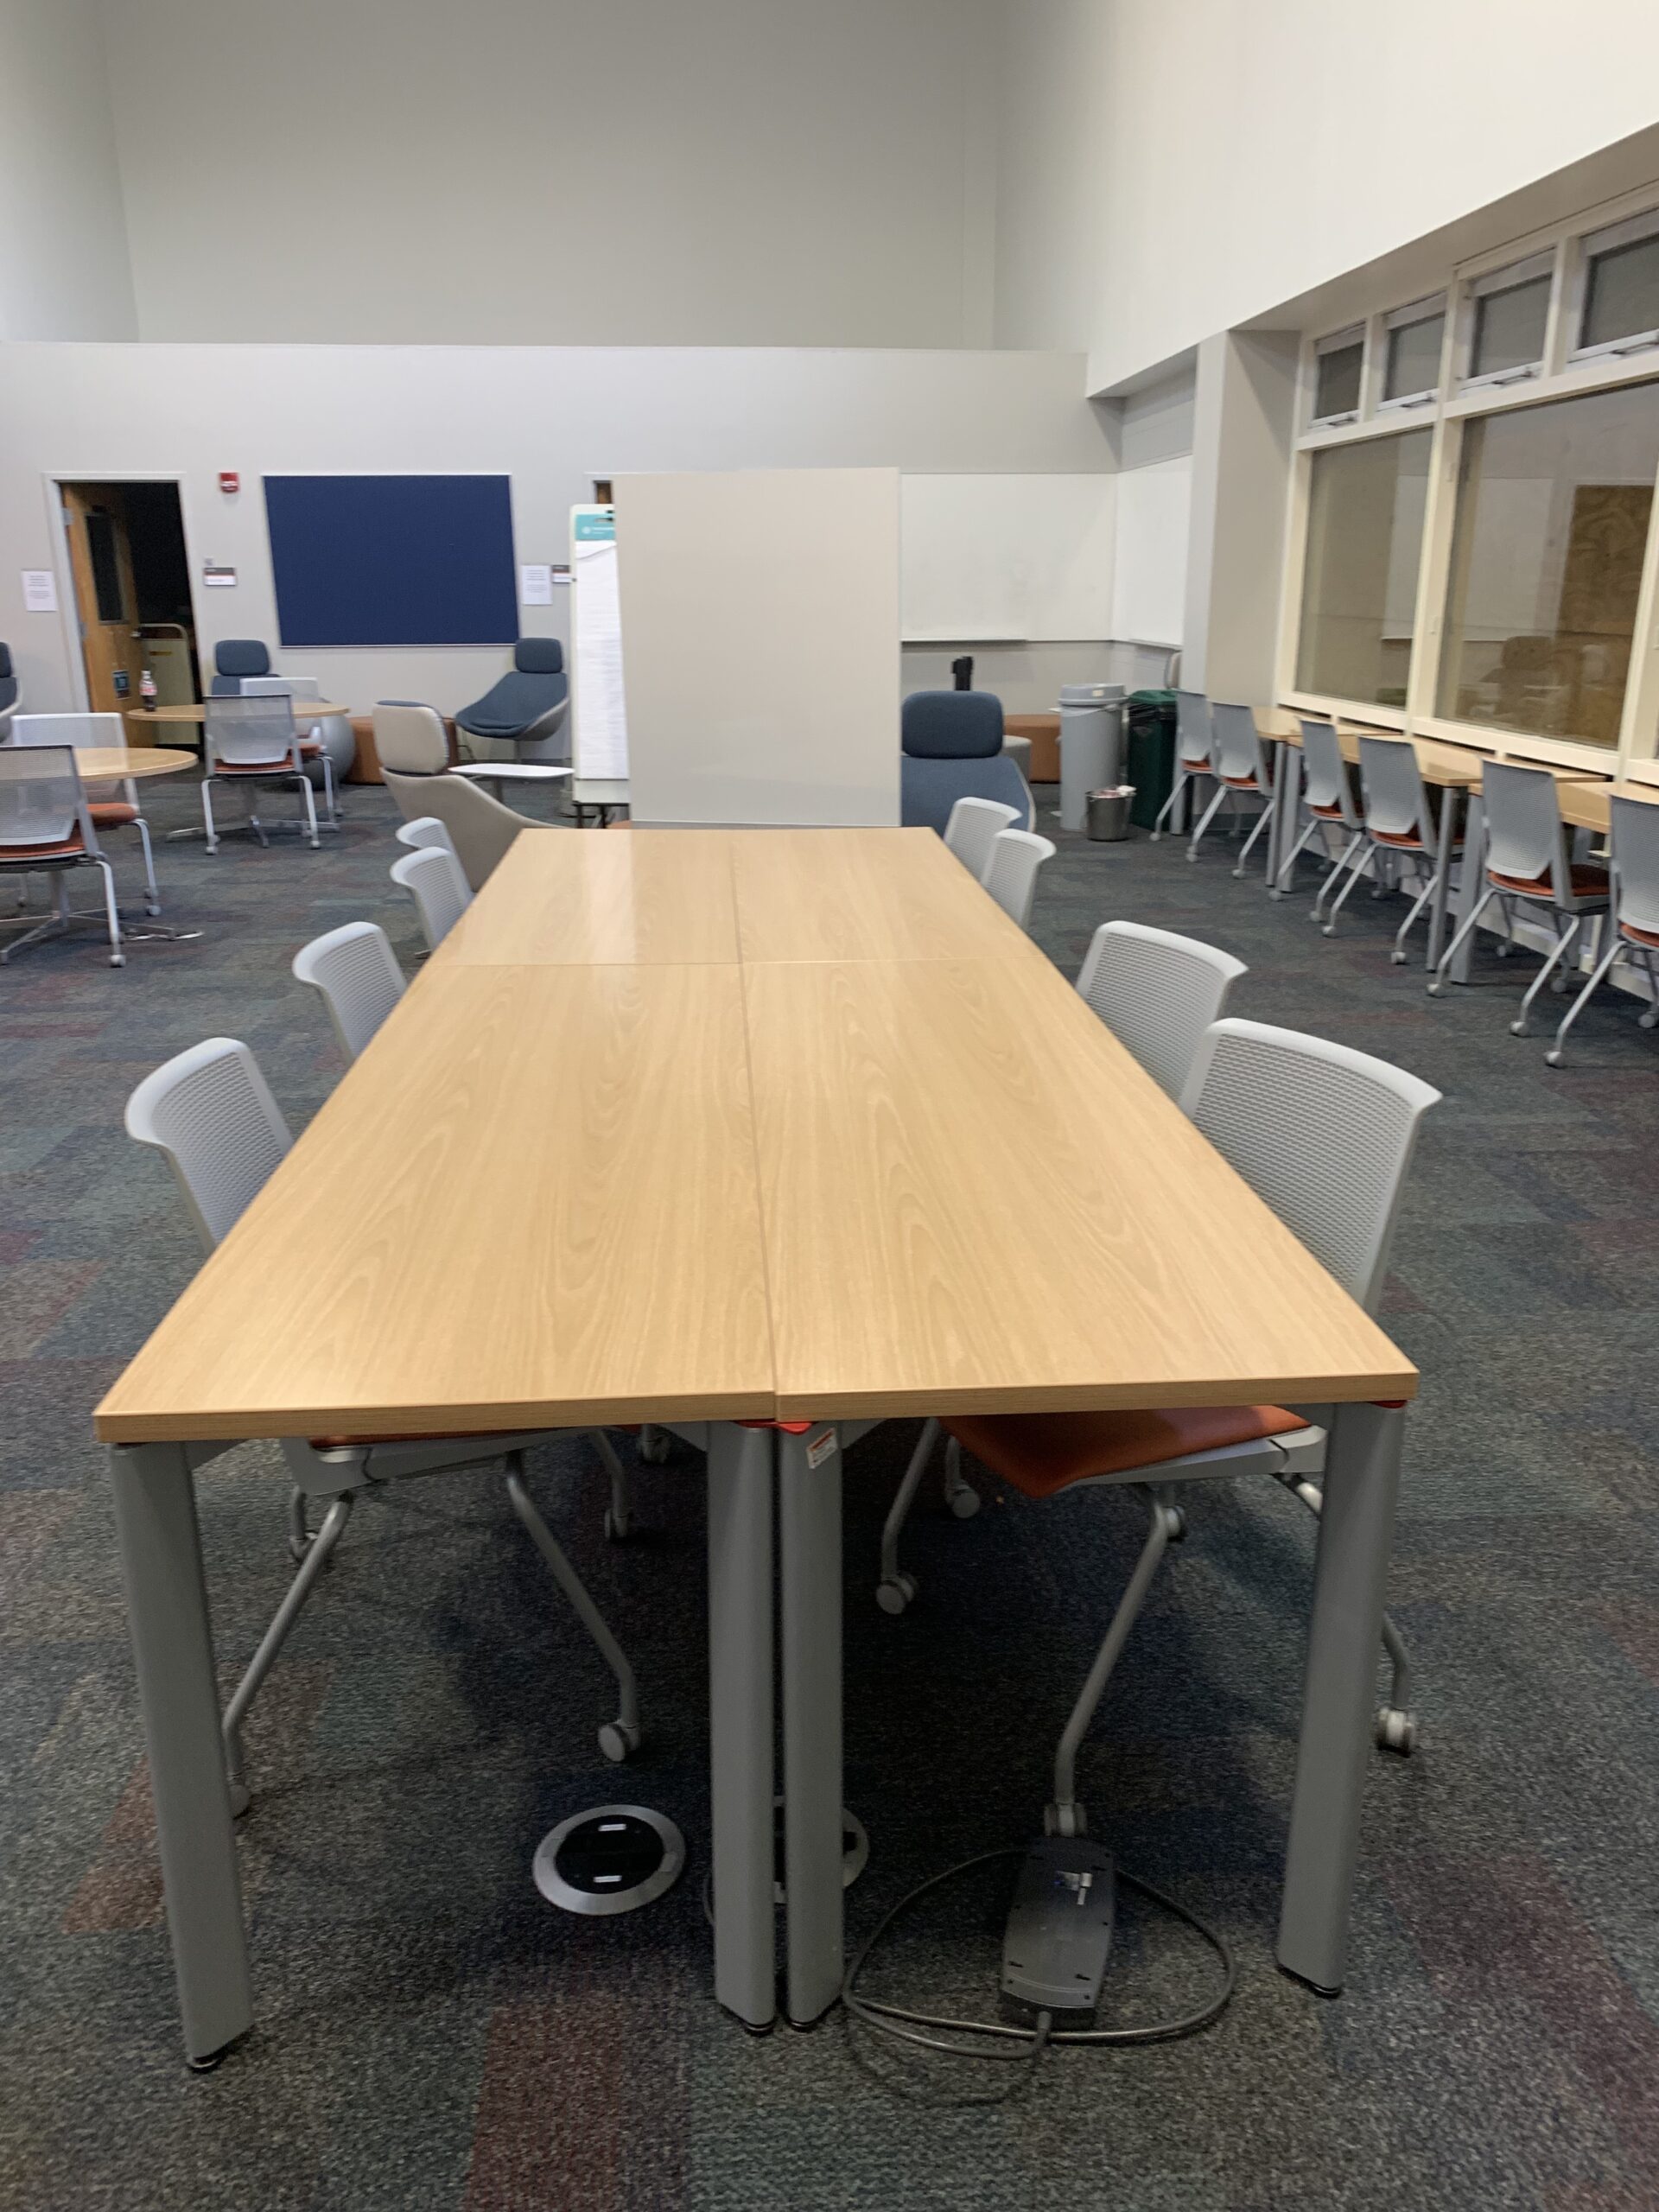 Table in the group study area that can seat up to ten people